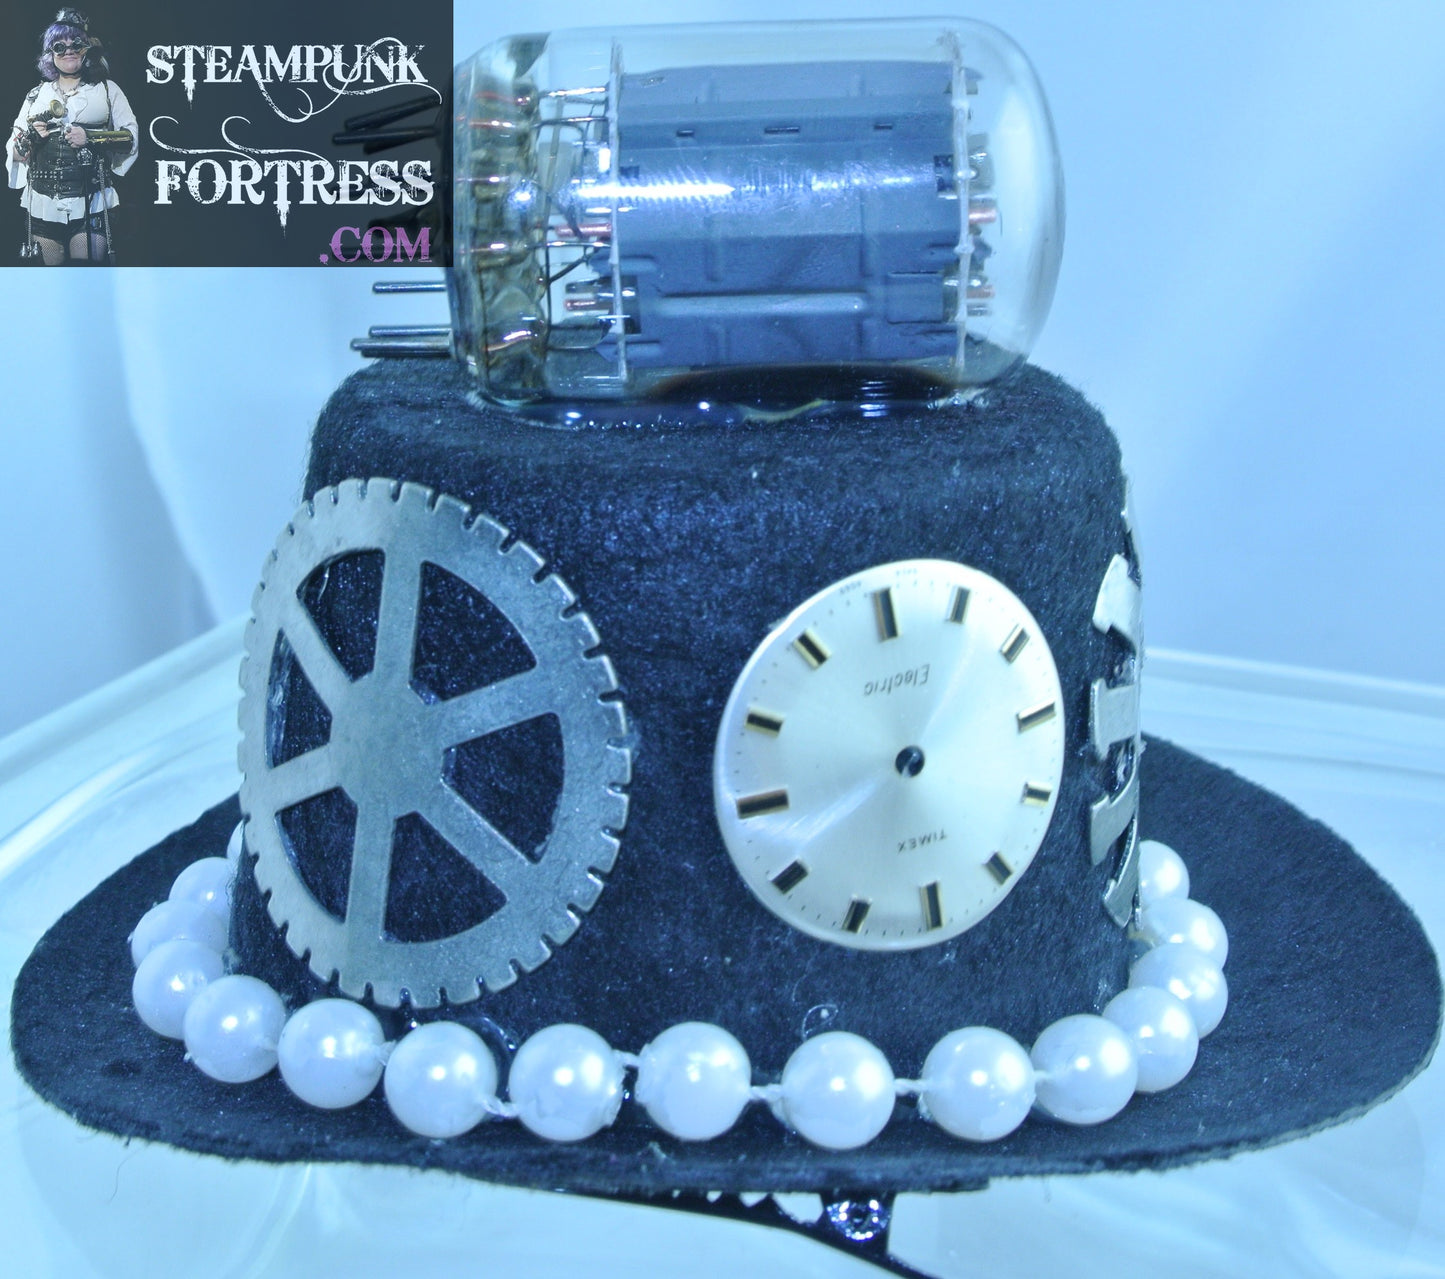 BLACK 3 SILVER CLOCK WATCH FACES DIALS 2 XL EXTRA LARGE GEARS GEAR PEARL BAND ROCKET TOP XS EXTRA SMALL MINI TOP HAT STARR WILDE STEAMPUNK FORTRESS